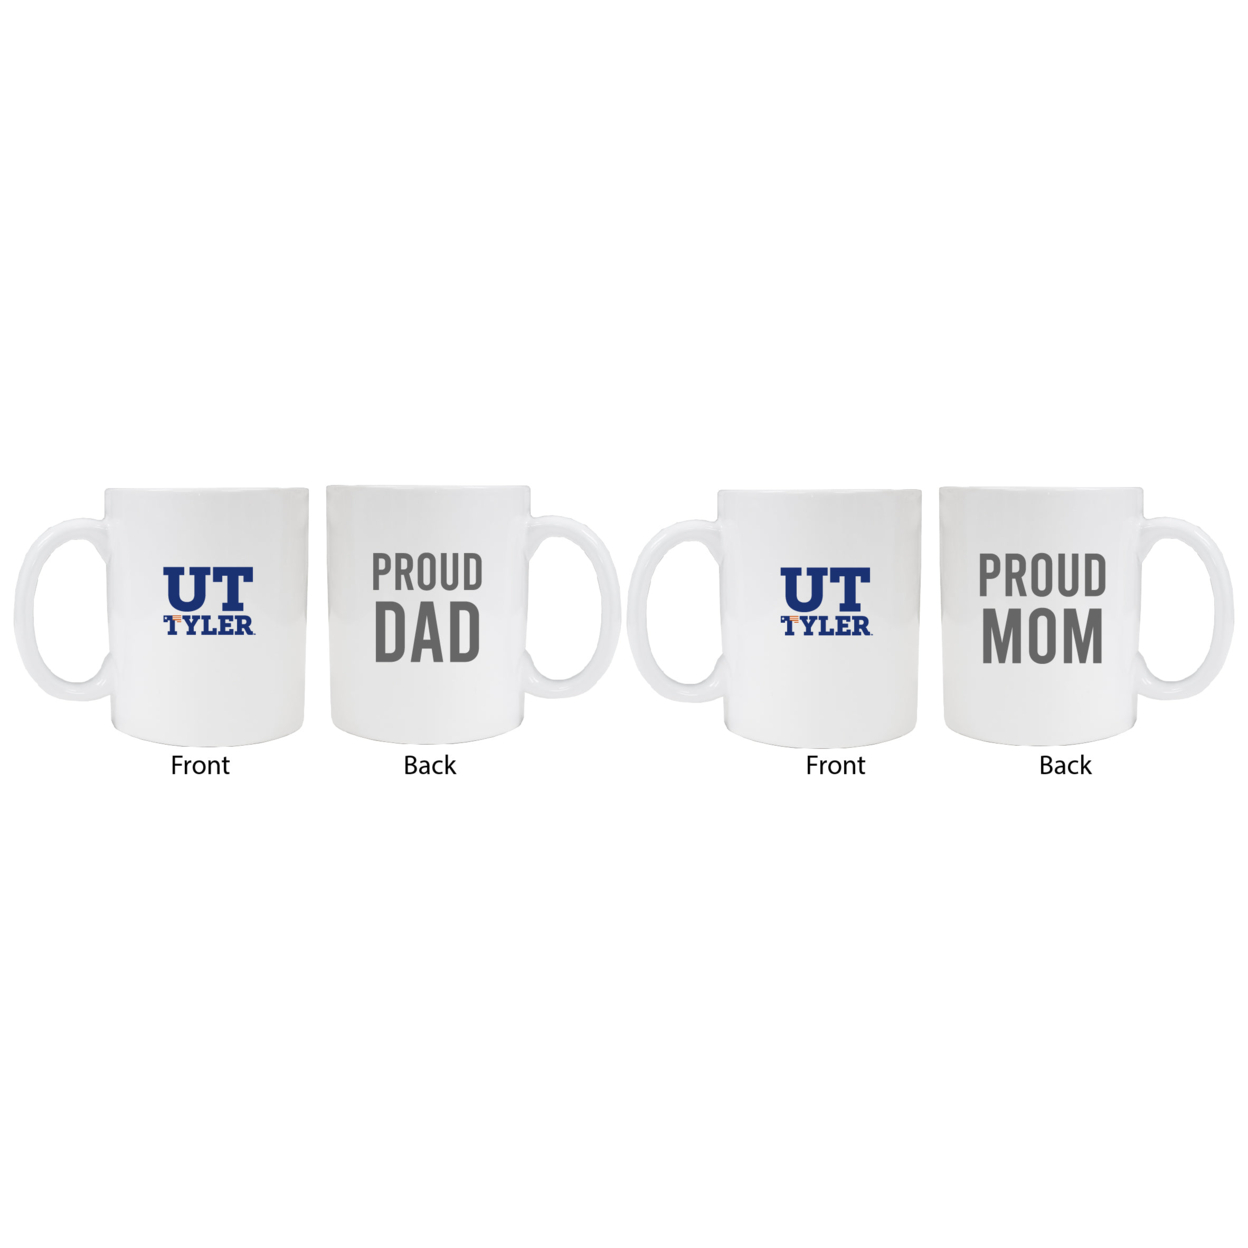 The University Of Texas At Tyler Proud Mom And Dad White Ceramic Coffee Mug 2 Pack (White).